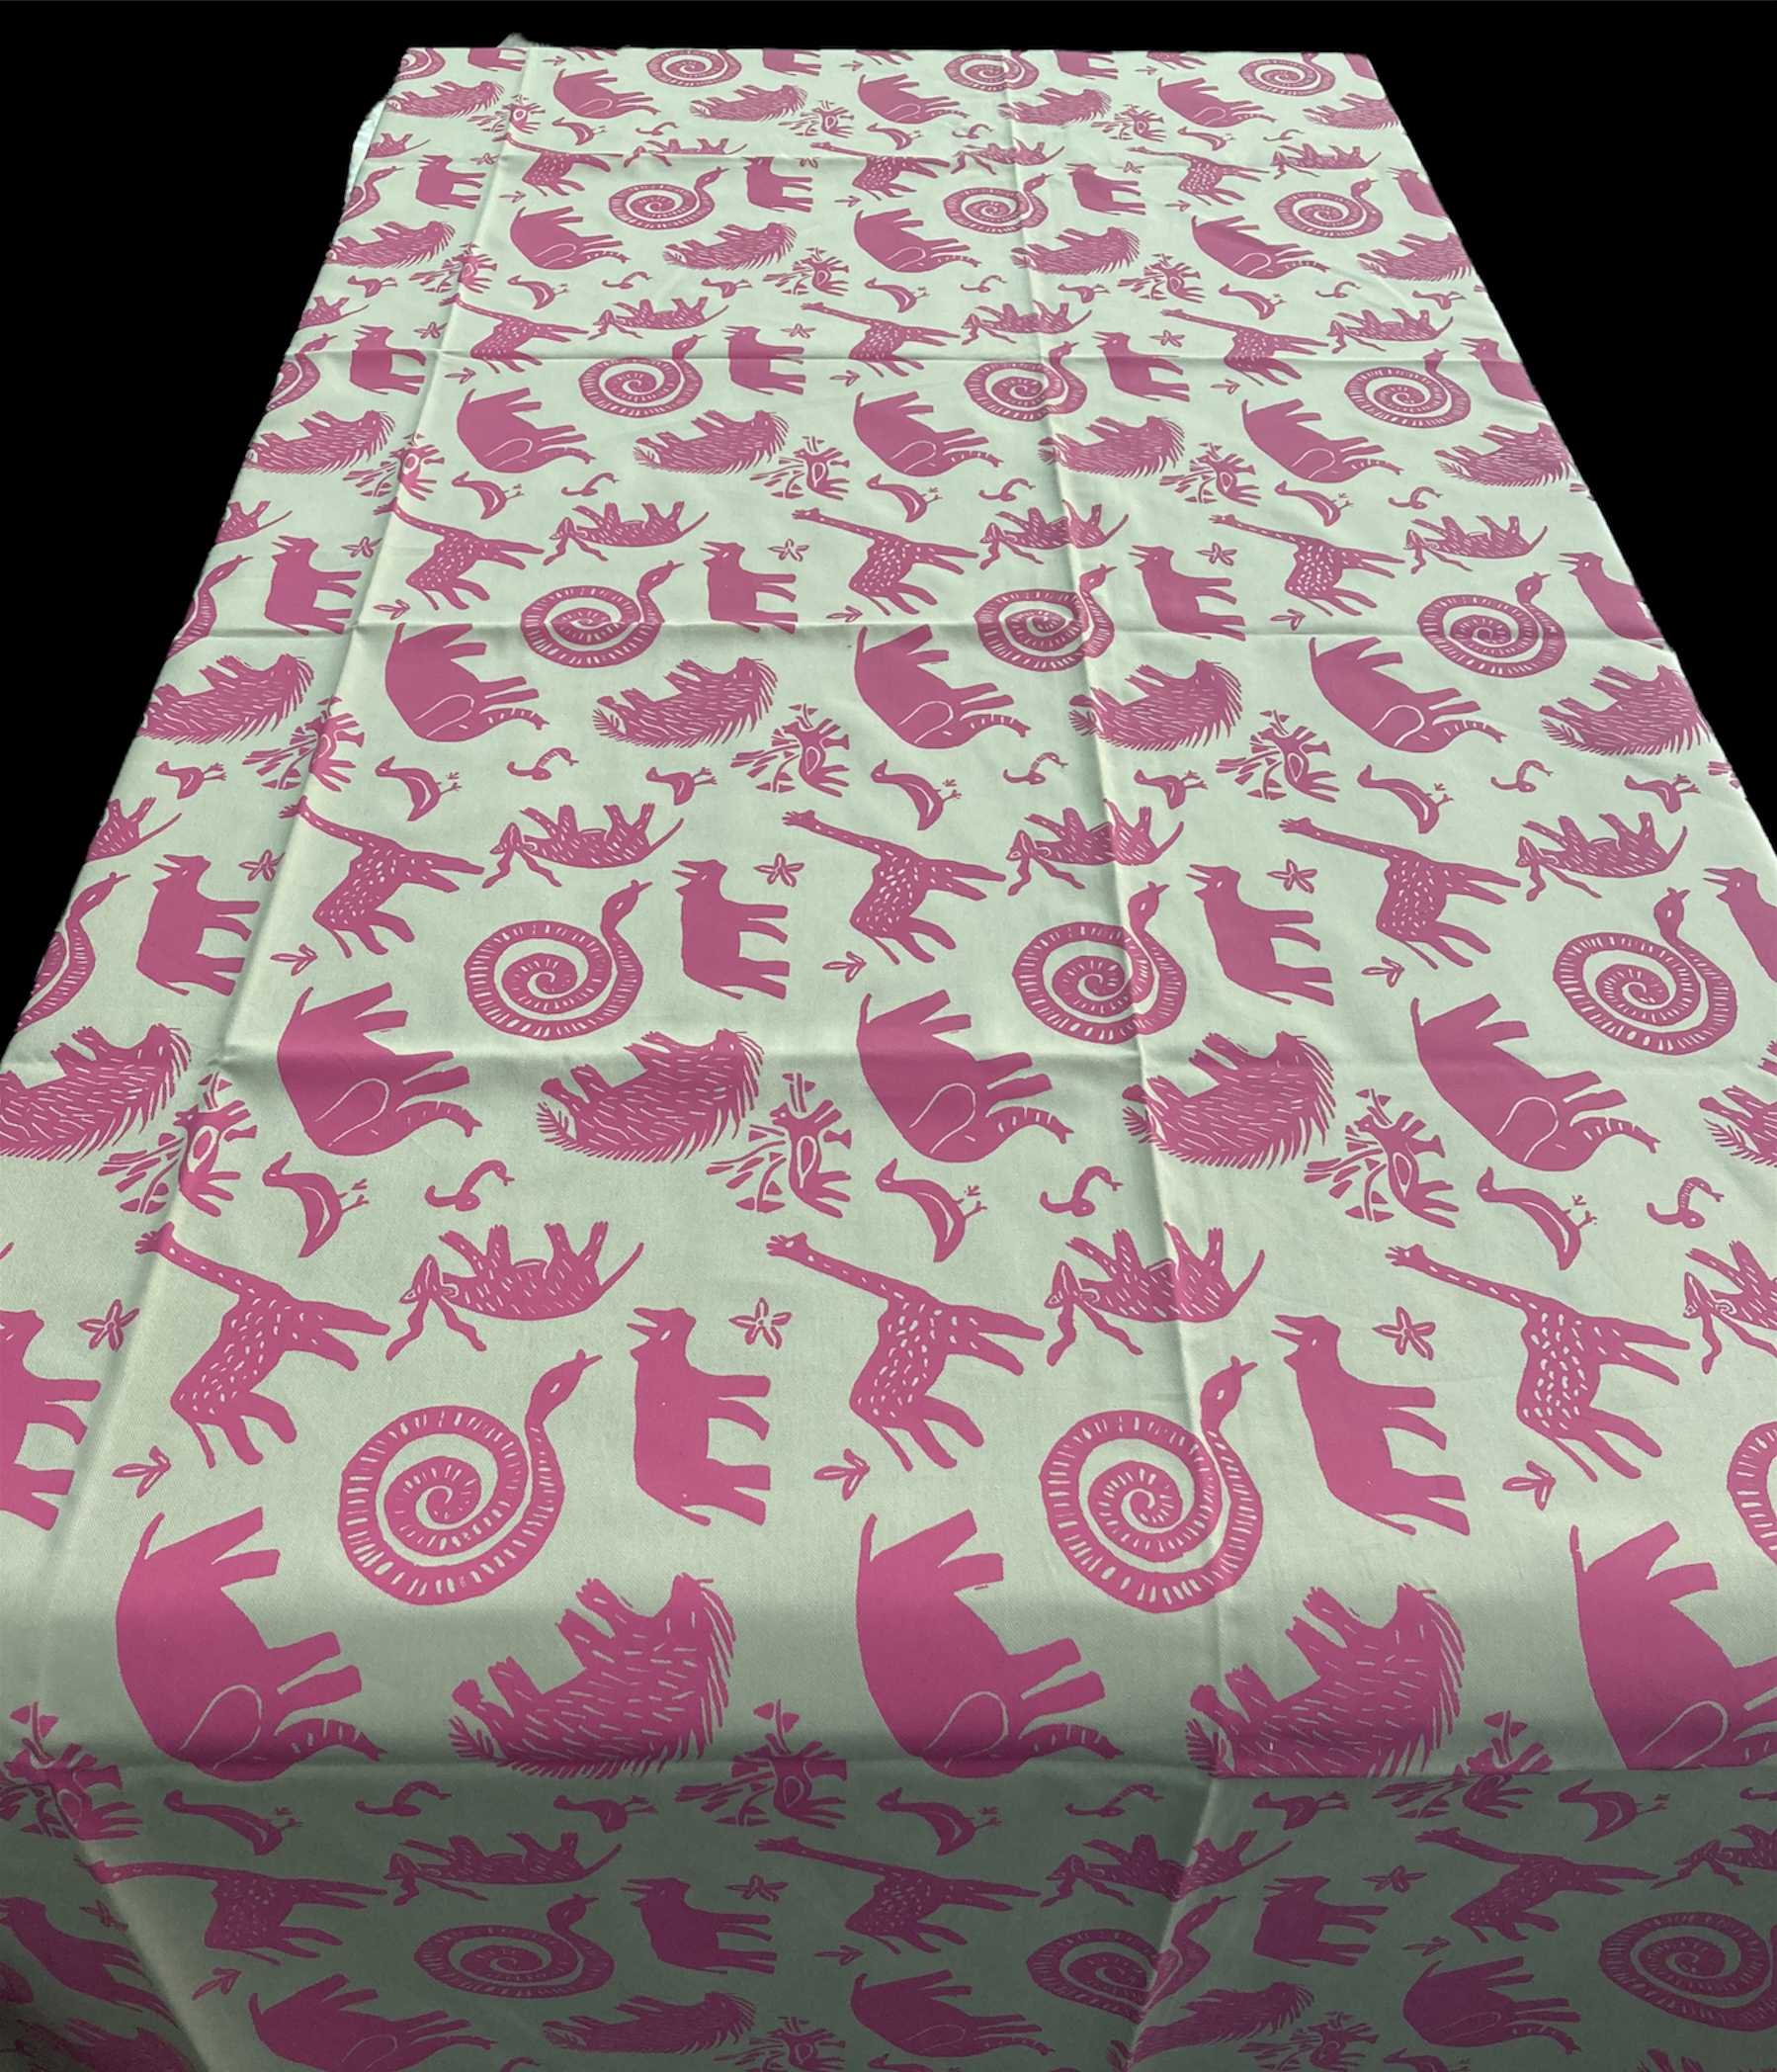 100% cotton Tablecloth approx. 59\" x 57\" from Namibia - # p06t